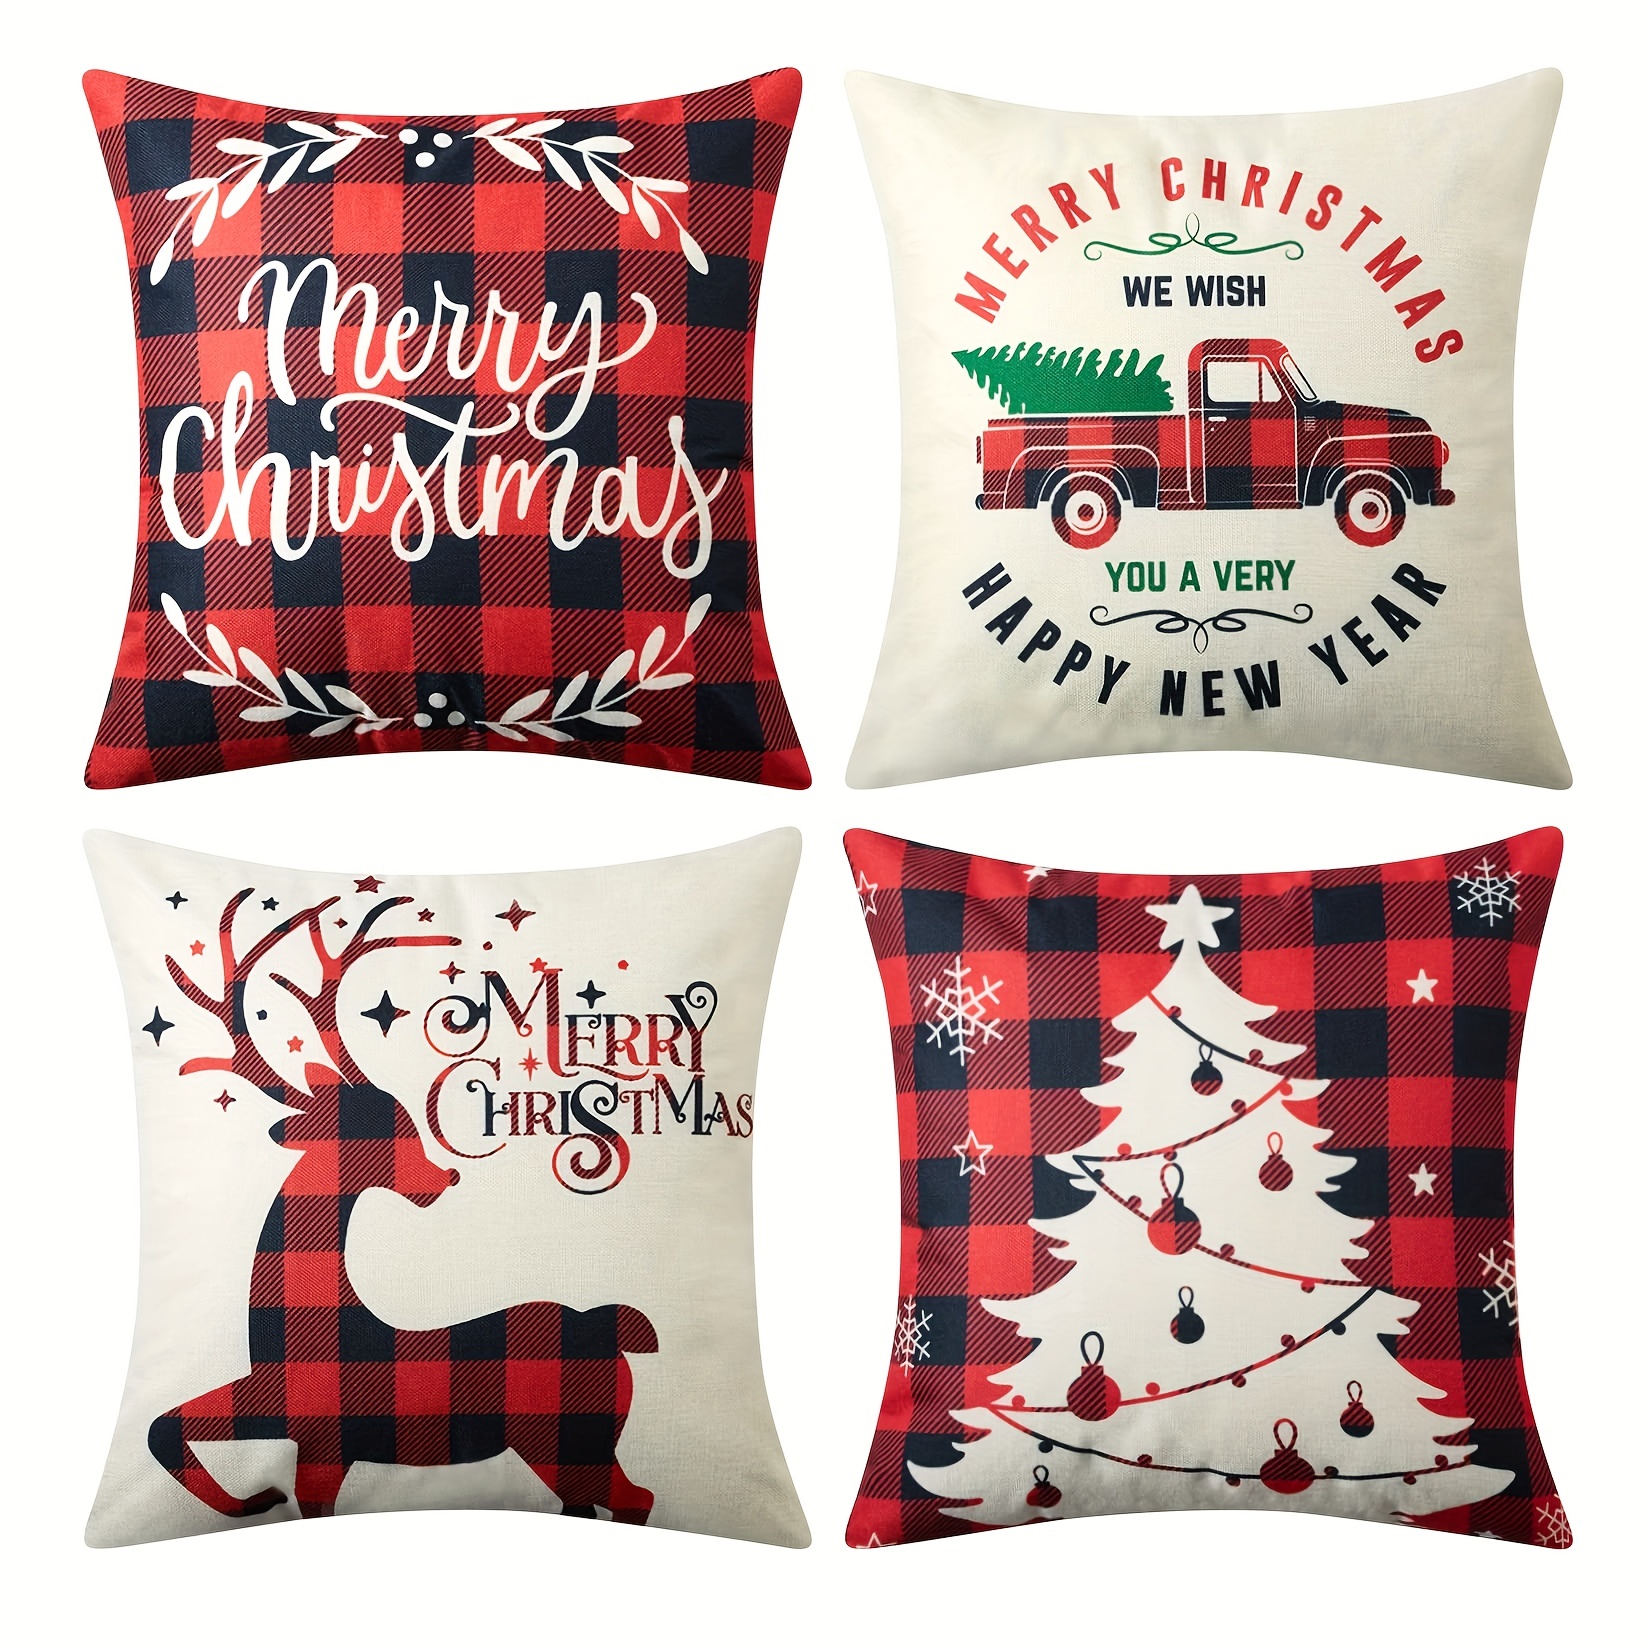 Custom Pillow Cases One Direction Square Pillowcase Christmas